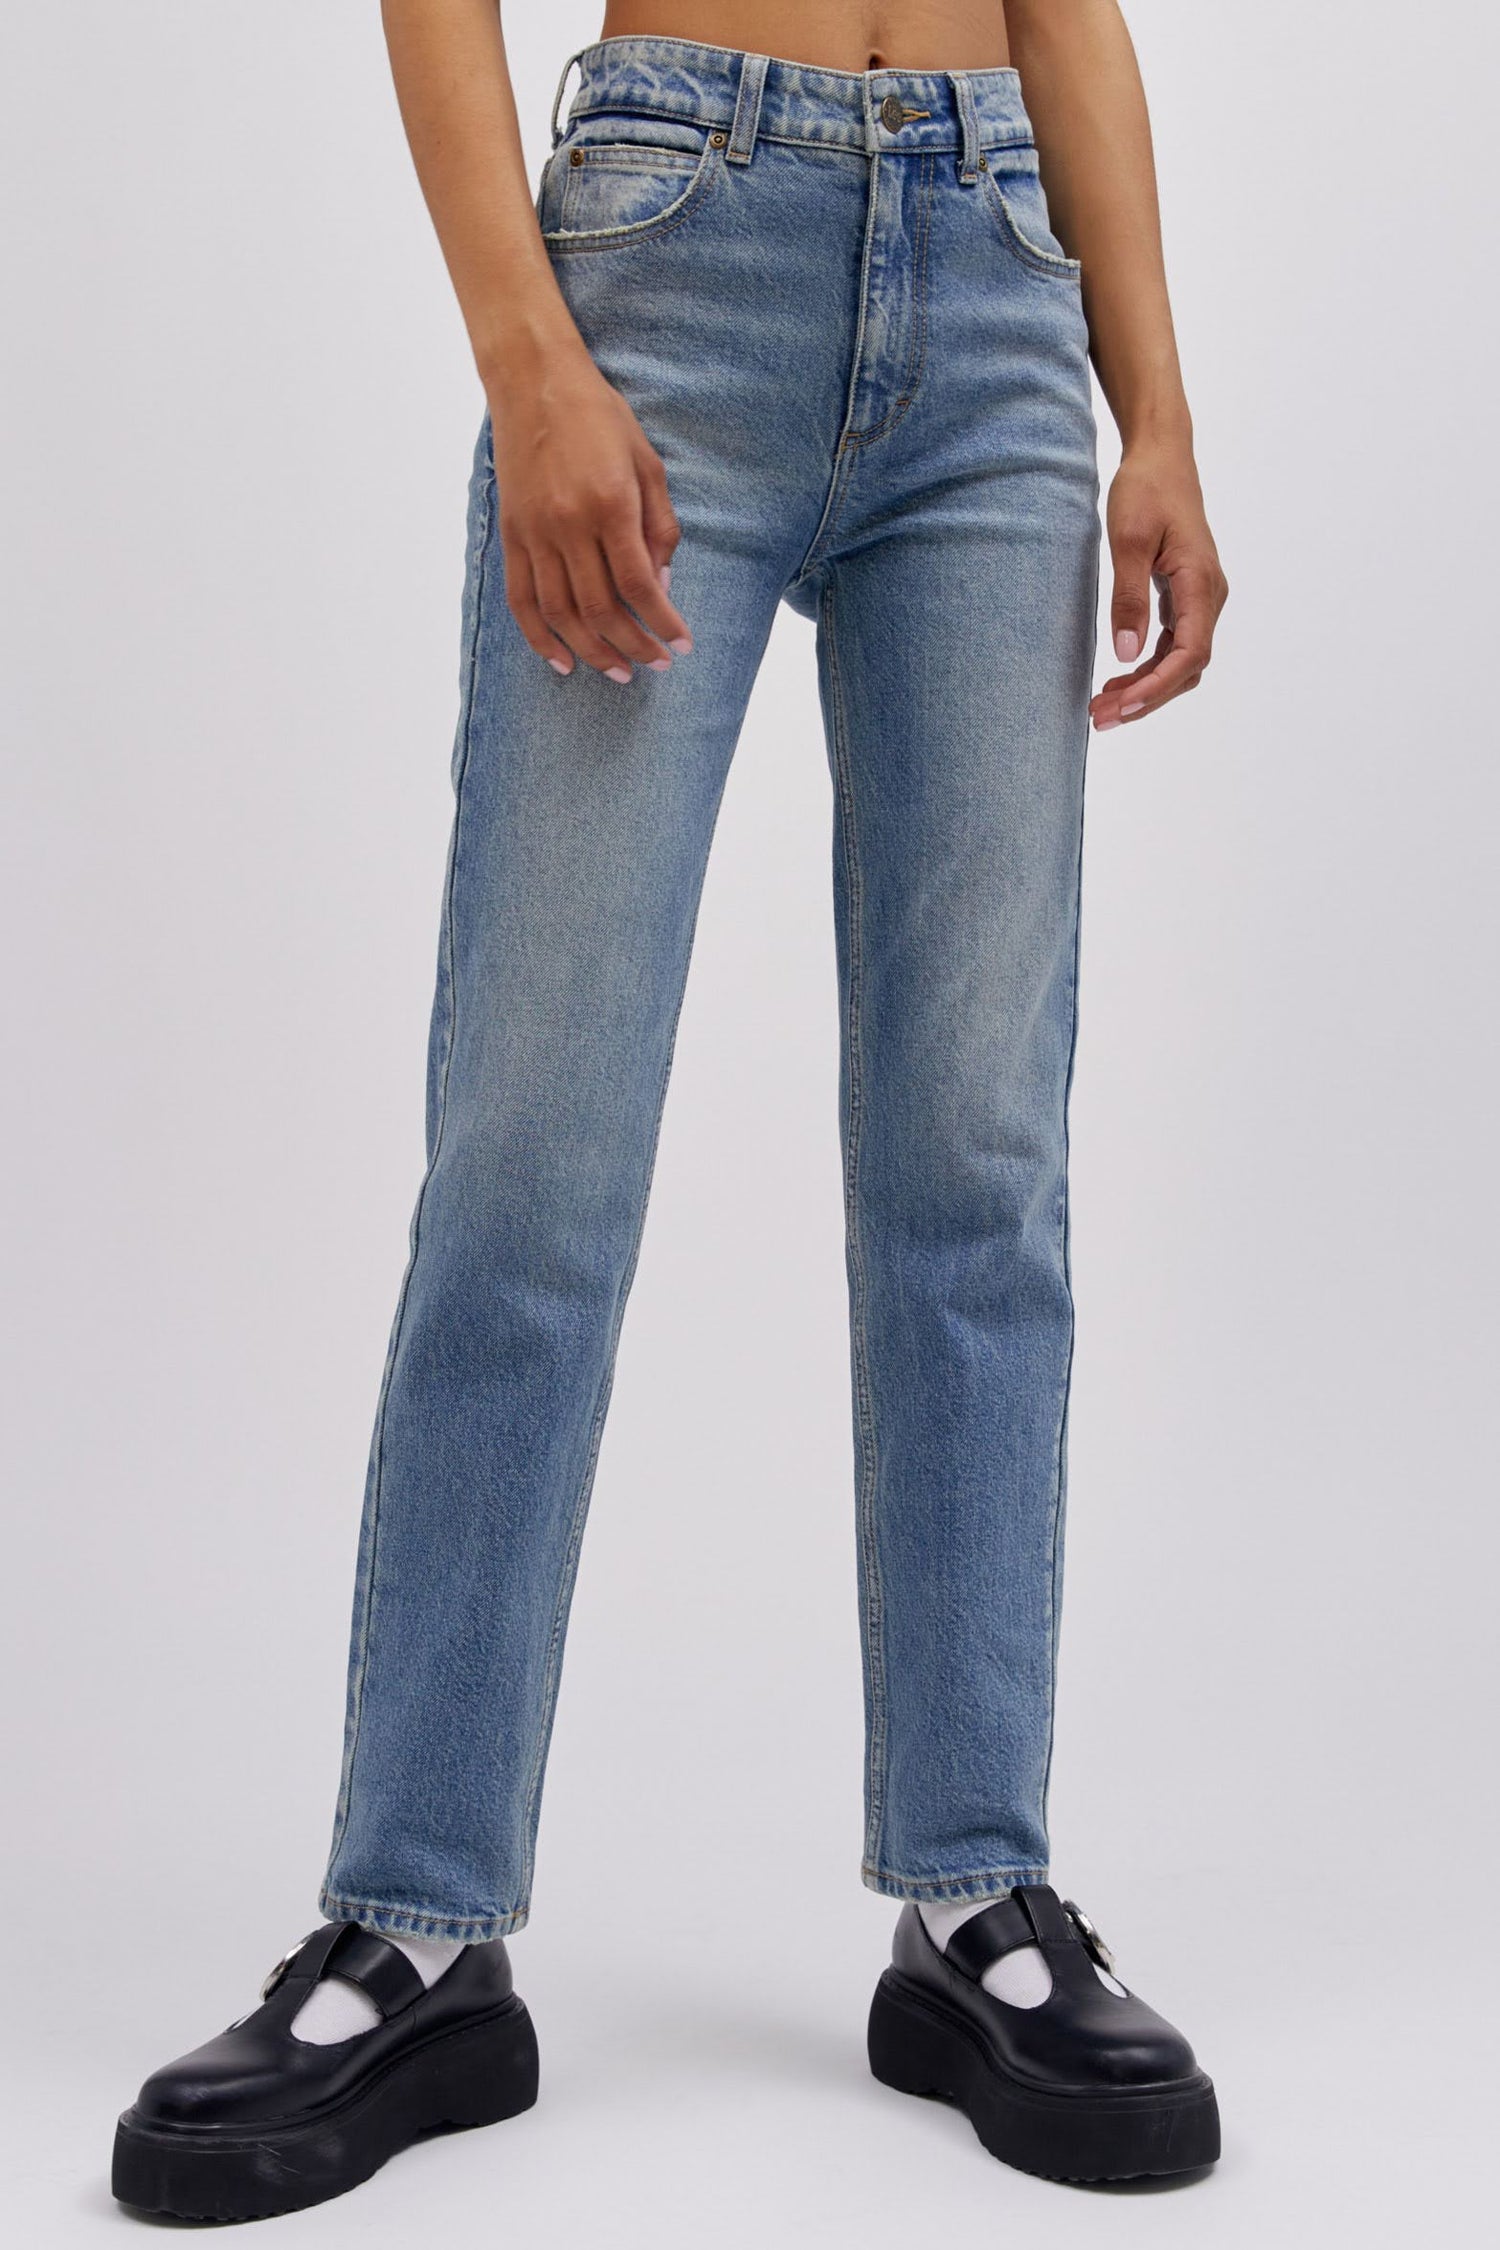 A model featuring a mid storm colored high rise and straight-legged jeans with a slim fit through the hips.